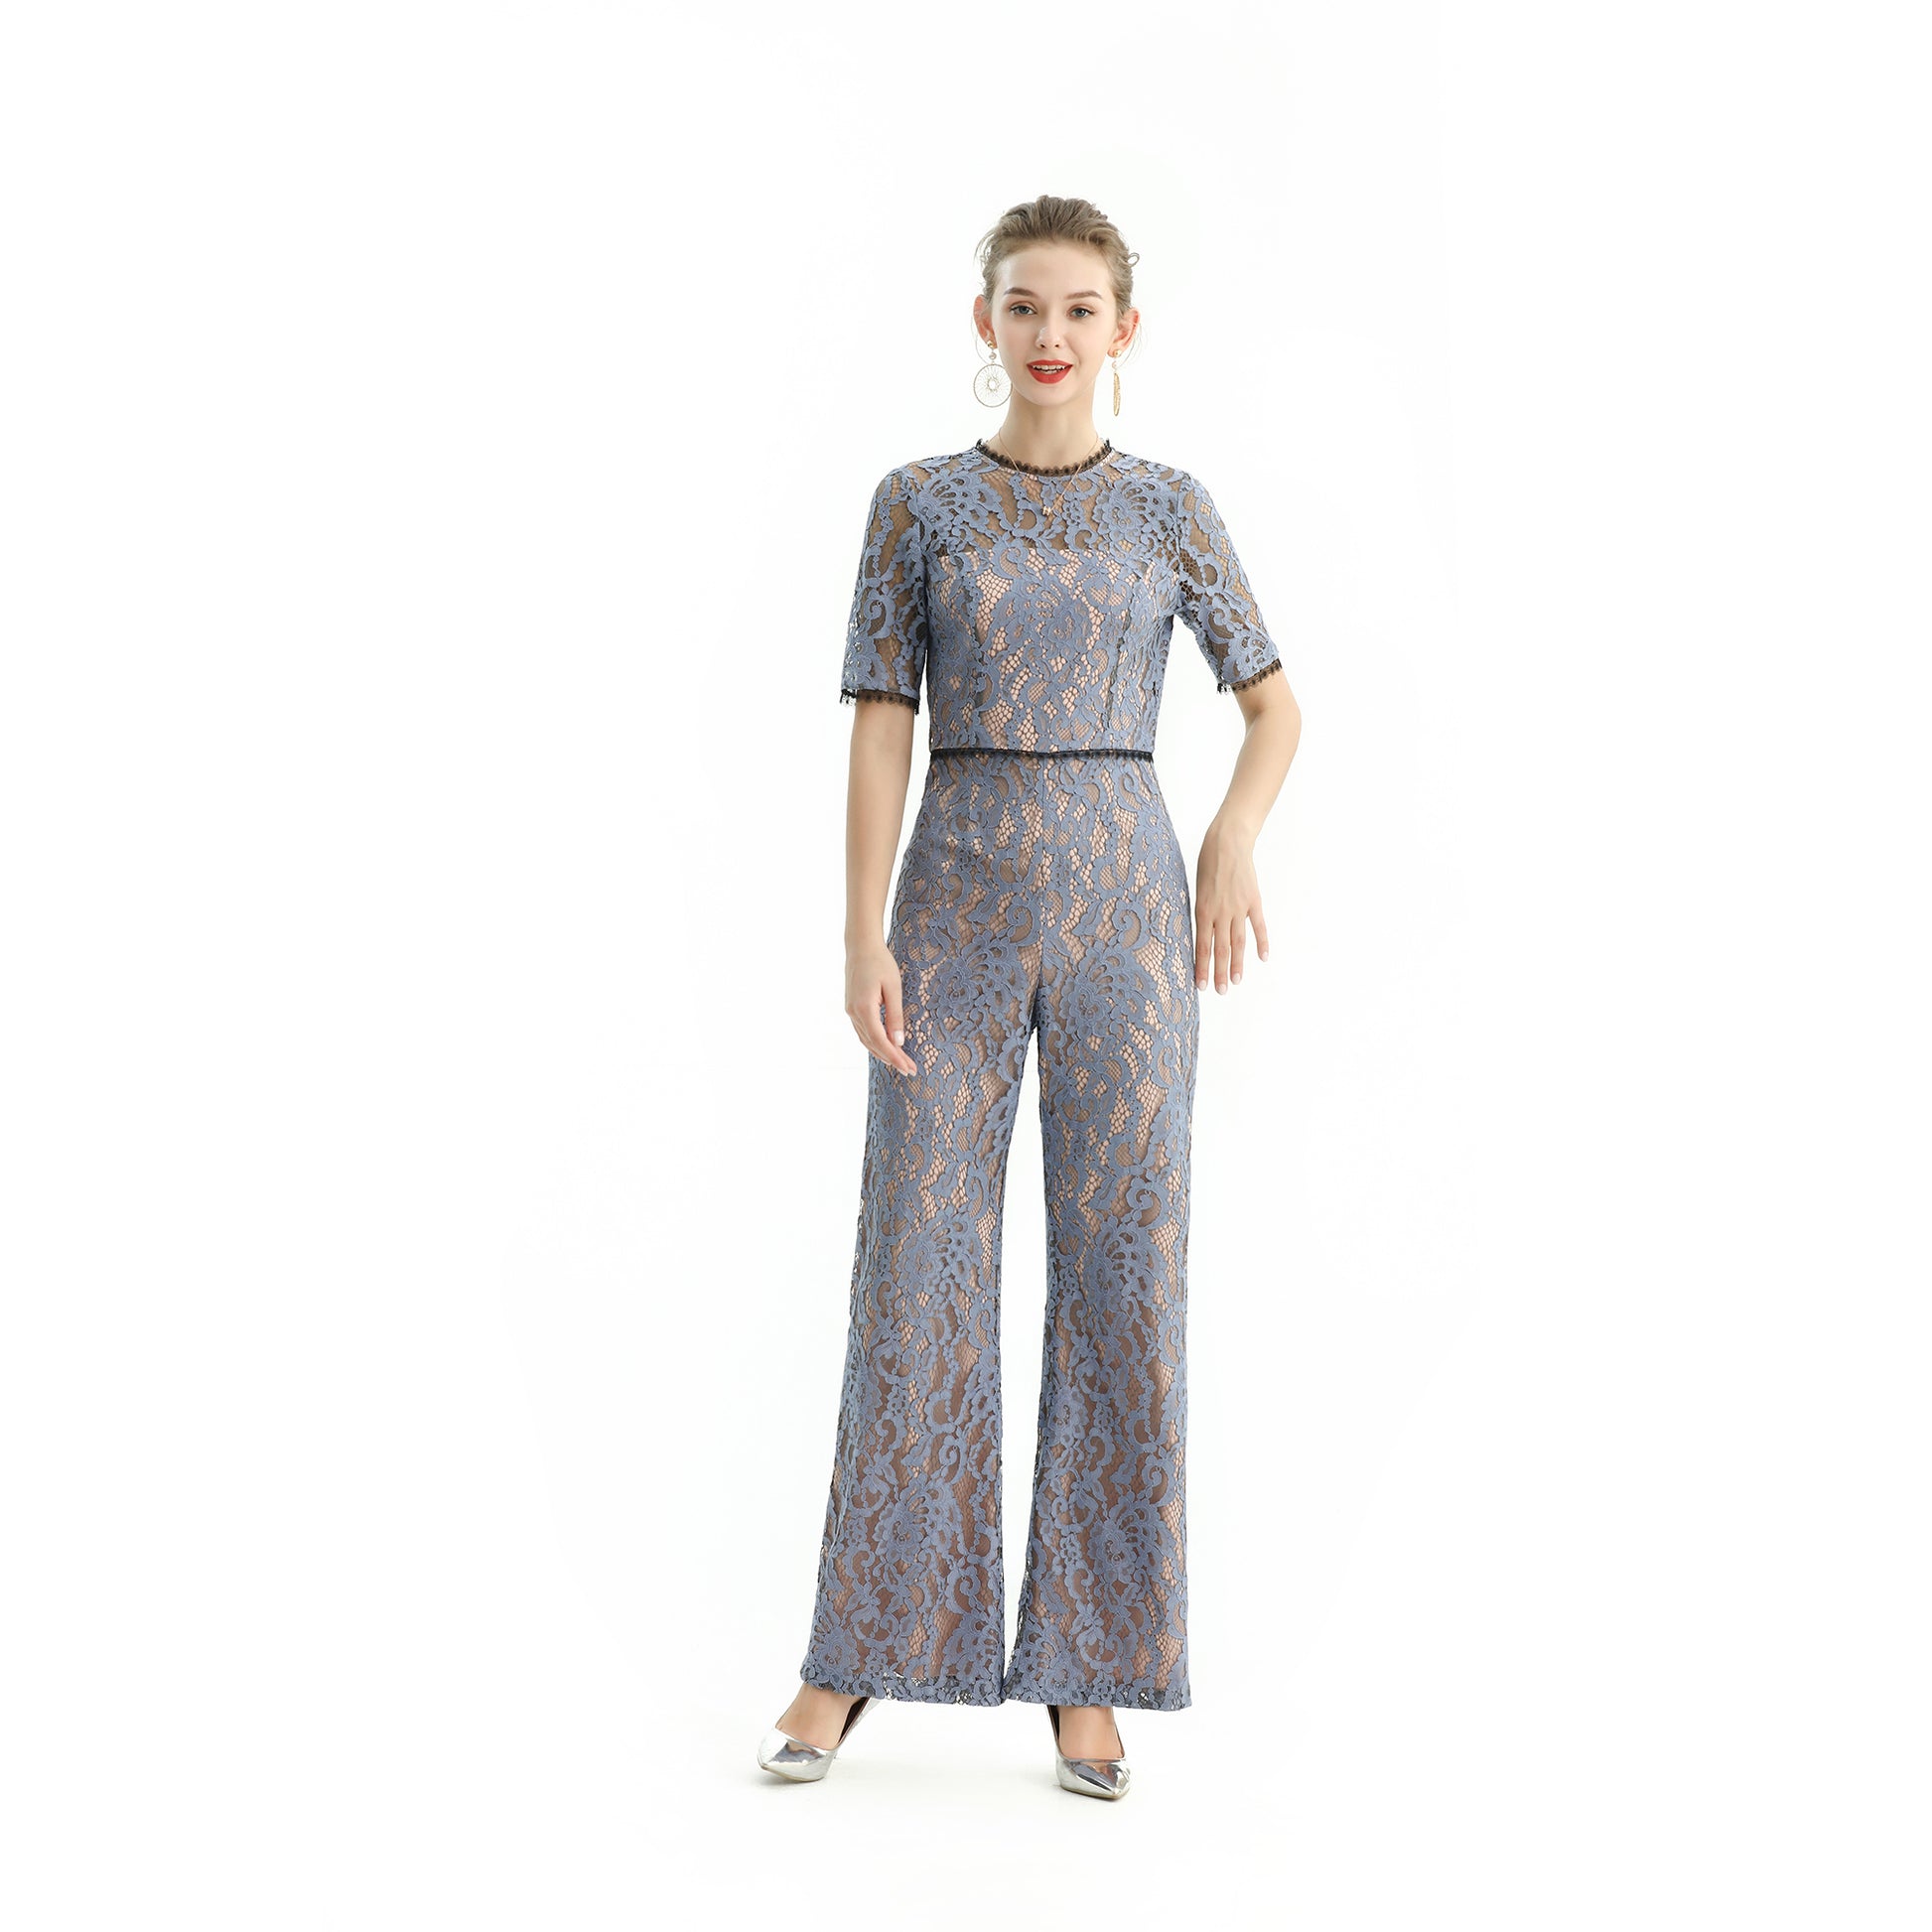 JJparty-R163 Women all-over lace short sleeves party jumpsuit